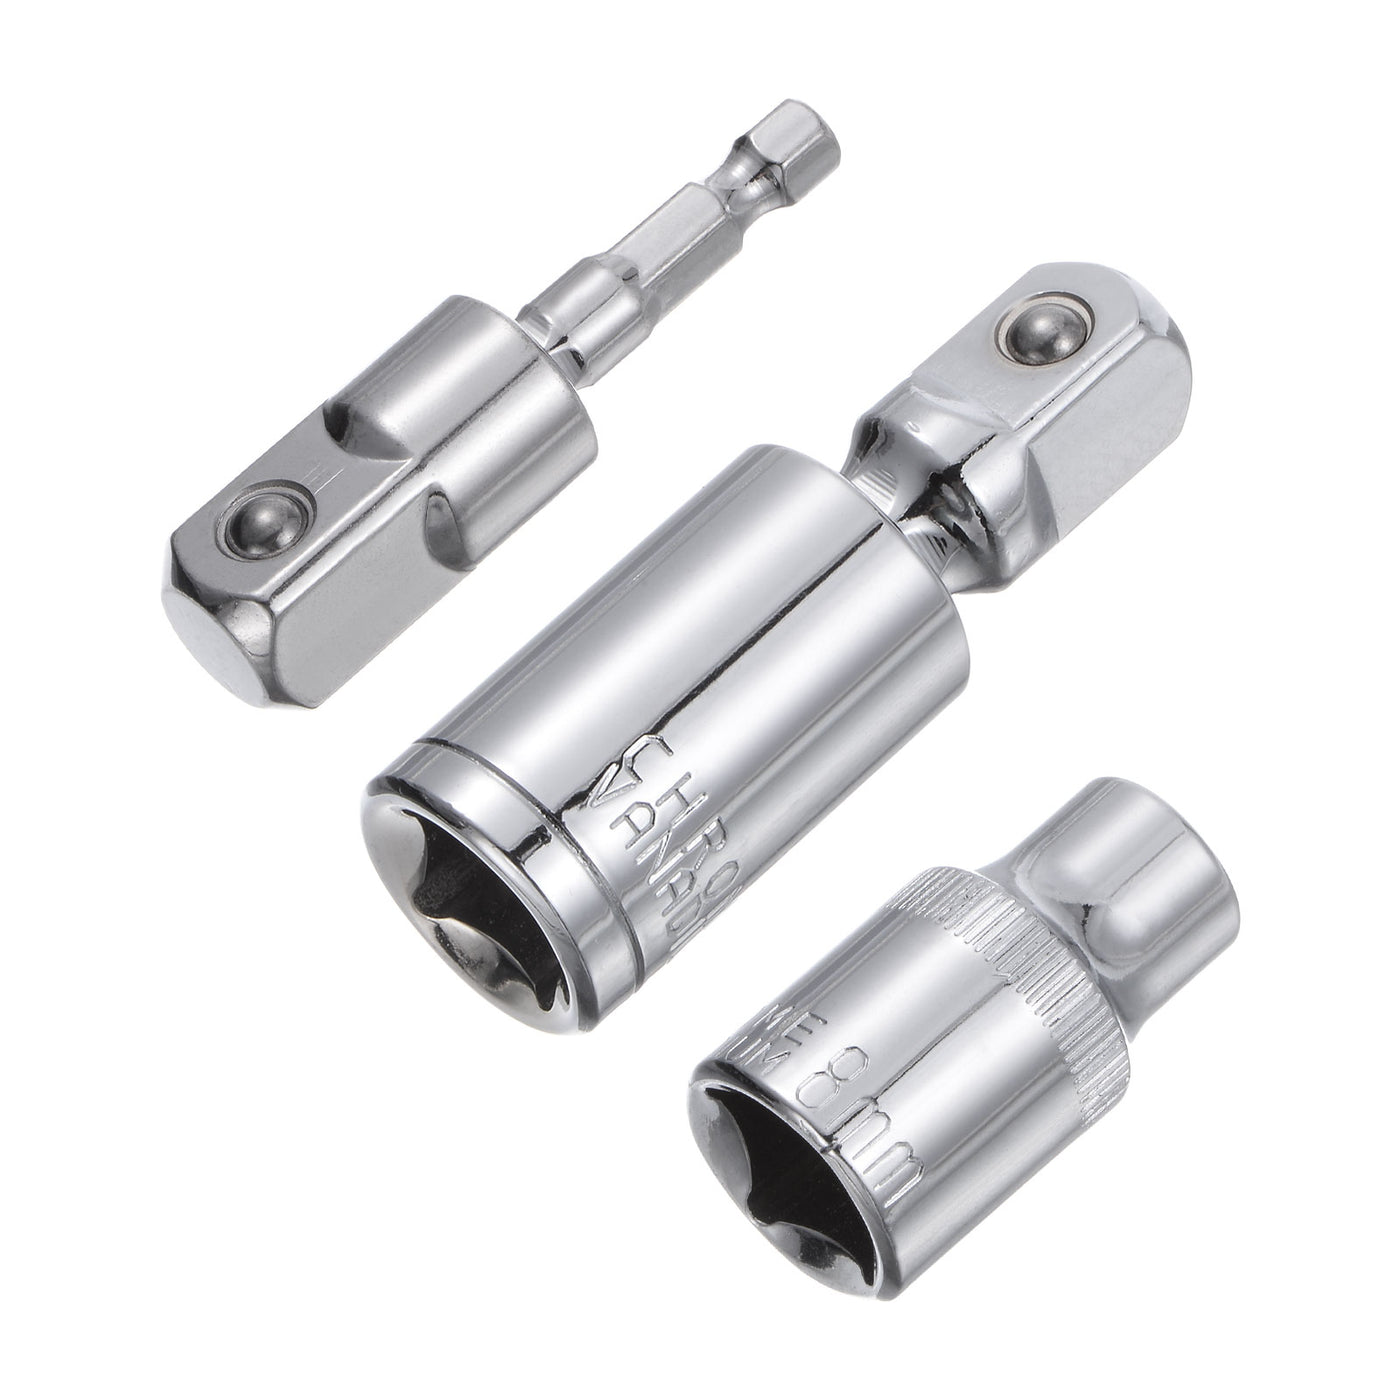 Uxcell Uxcell 1/2" Drive 23mm Shallow Socket Swivel Joints Hex Shank Impact Driver Adaptor Set